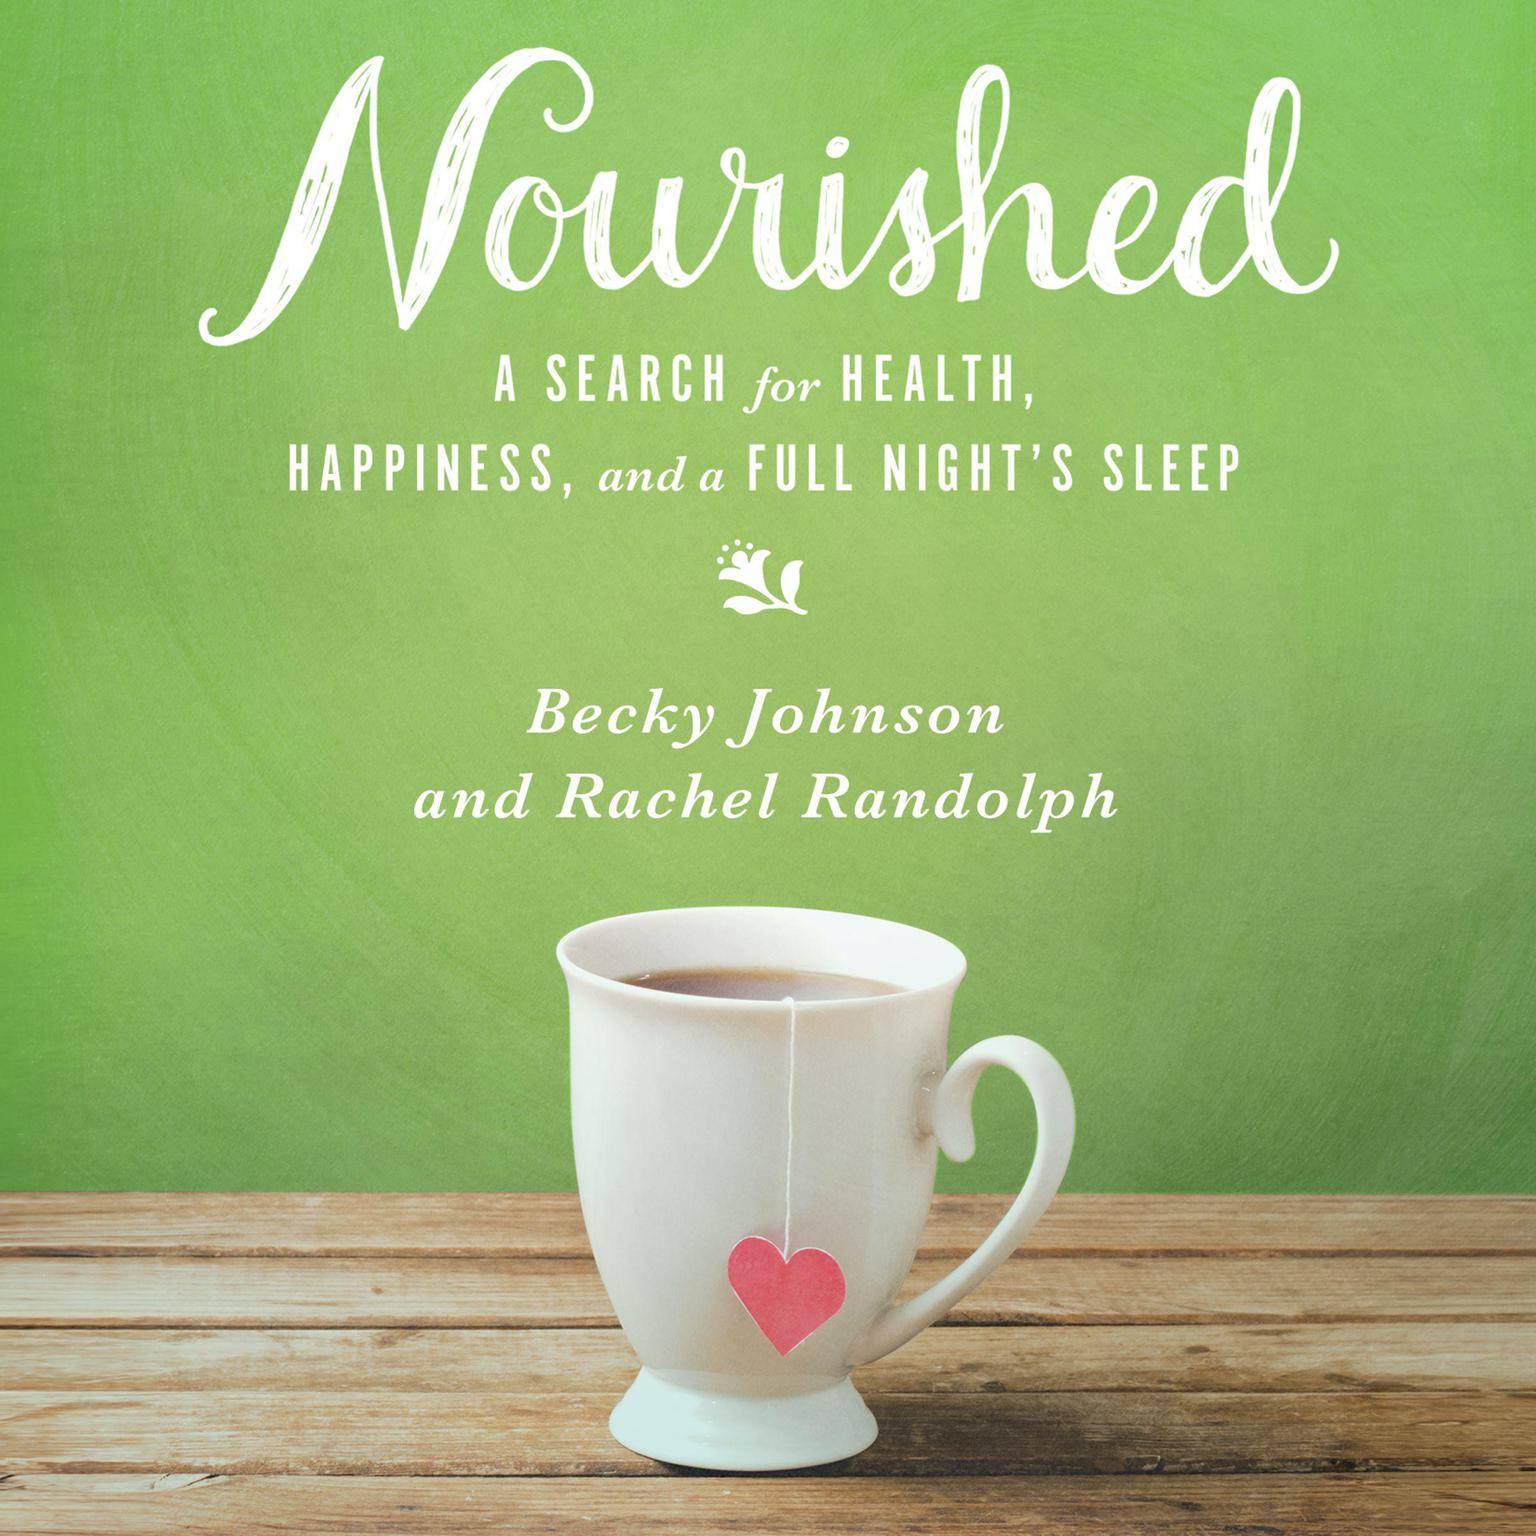 Nourished: A Search for Health, Happiness, and a Full Night’s Sleep Audiobook, by Becky Johnson